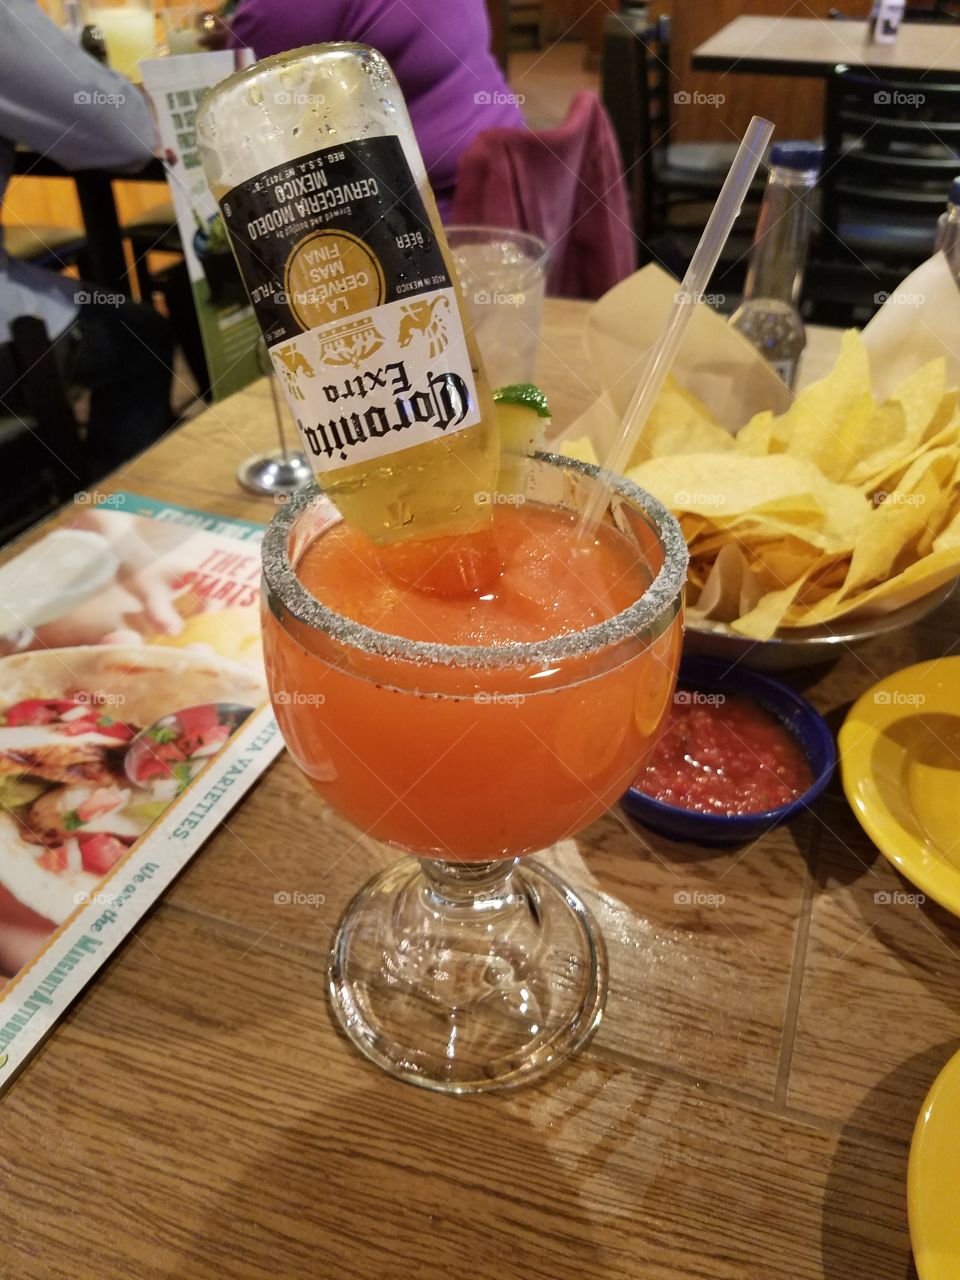 This Coronarita was one of the best darn drinks I've had in a long time. Whoever thought of mixing beer and margaritas is a genius! Then we add a little chips and salsa on the side and BOOM you have the perfect combo.